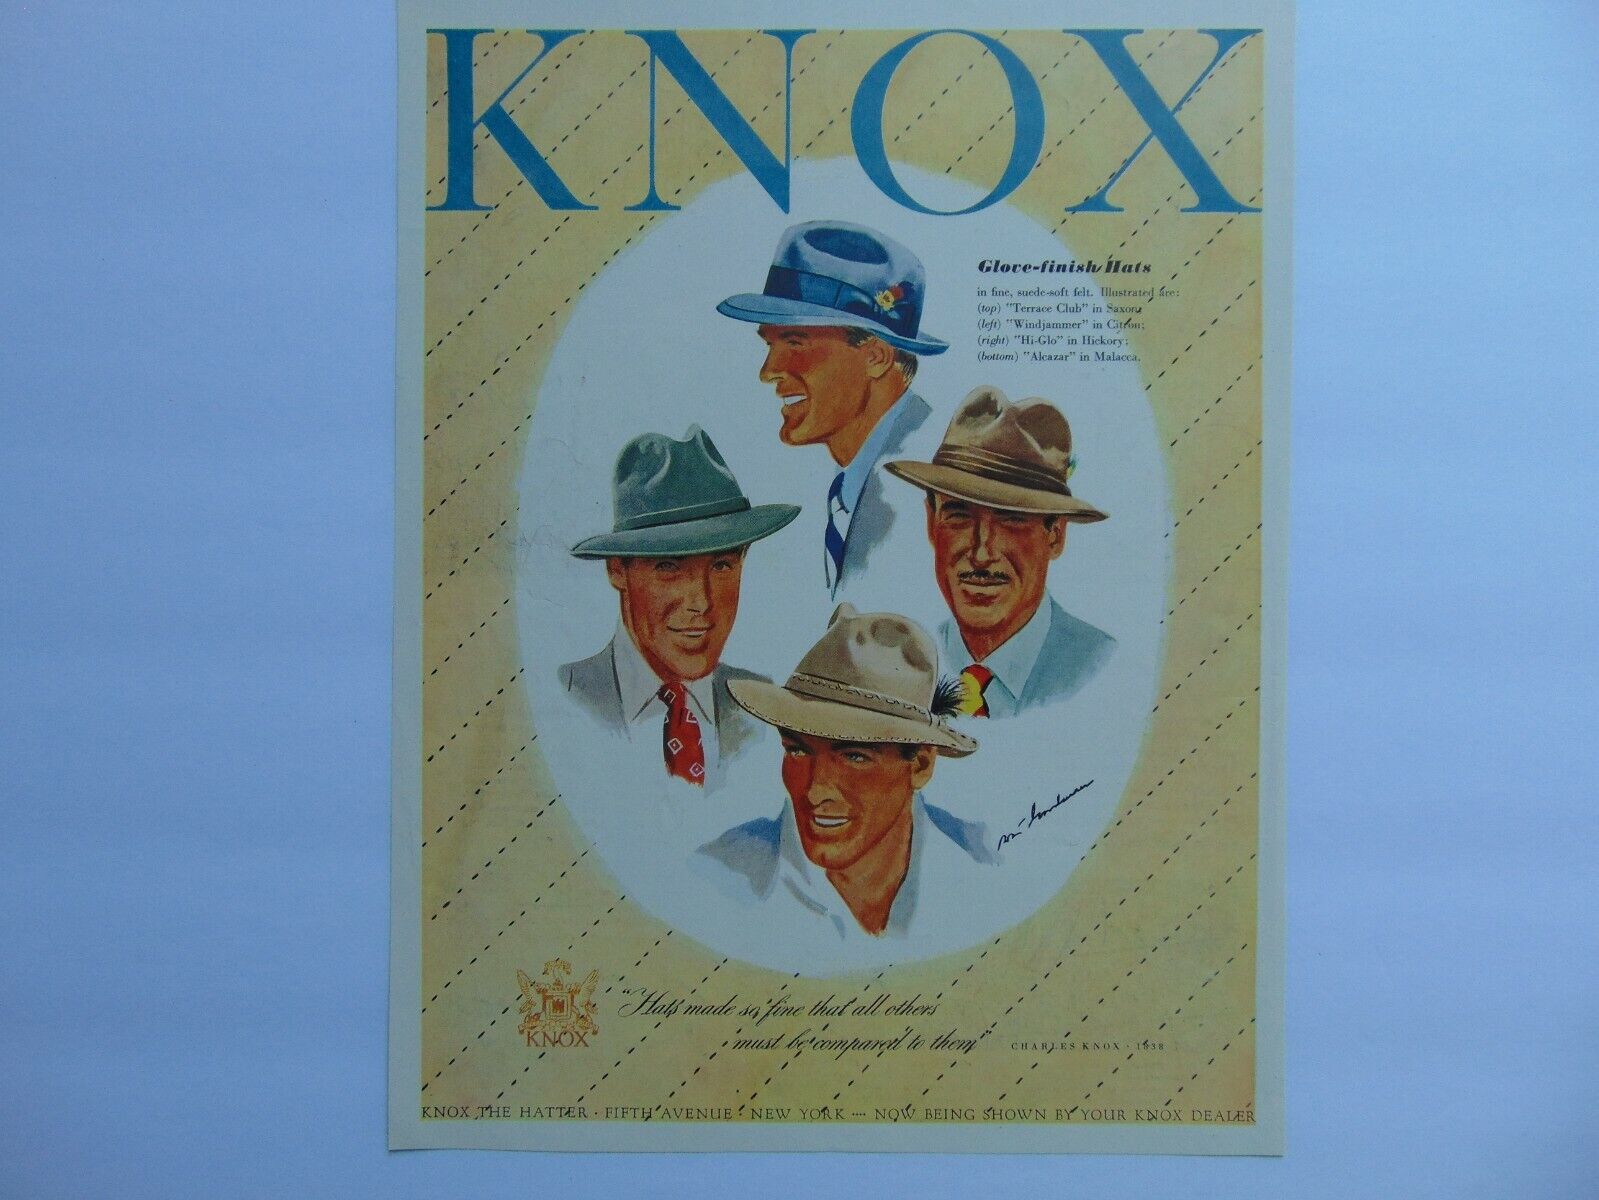 1947 KNOX MENS HATS KNOX THE HATTER Fifth Ave New York vintage art print ad